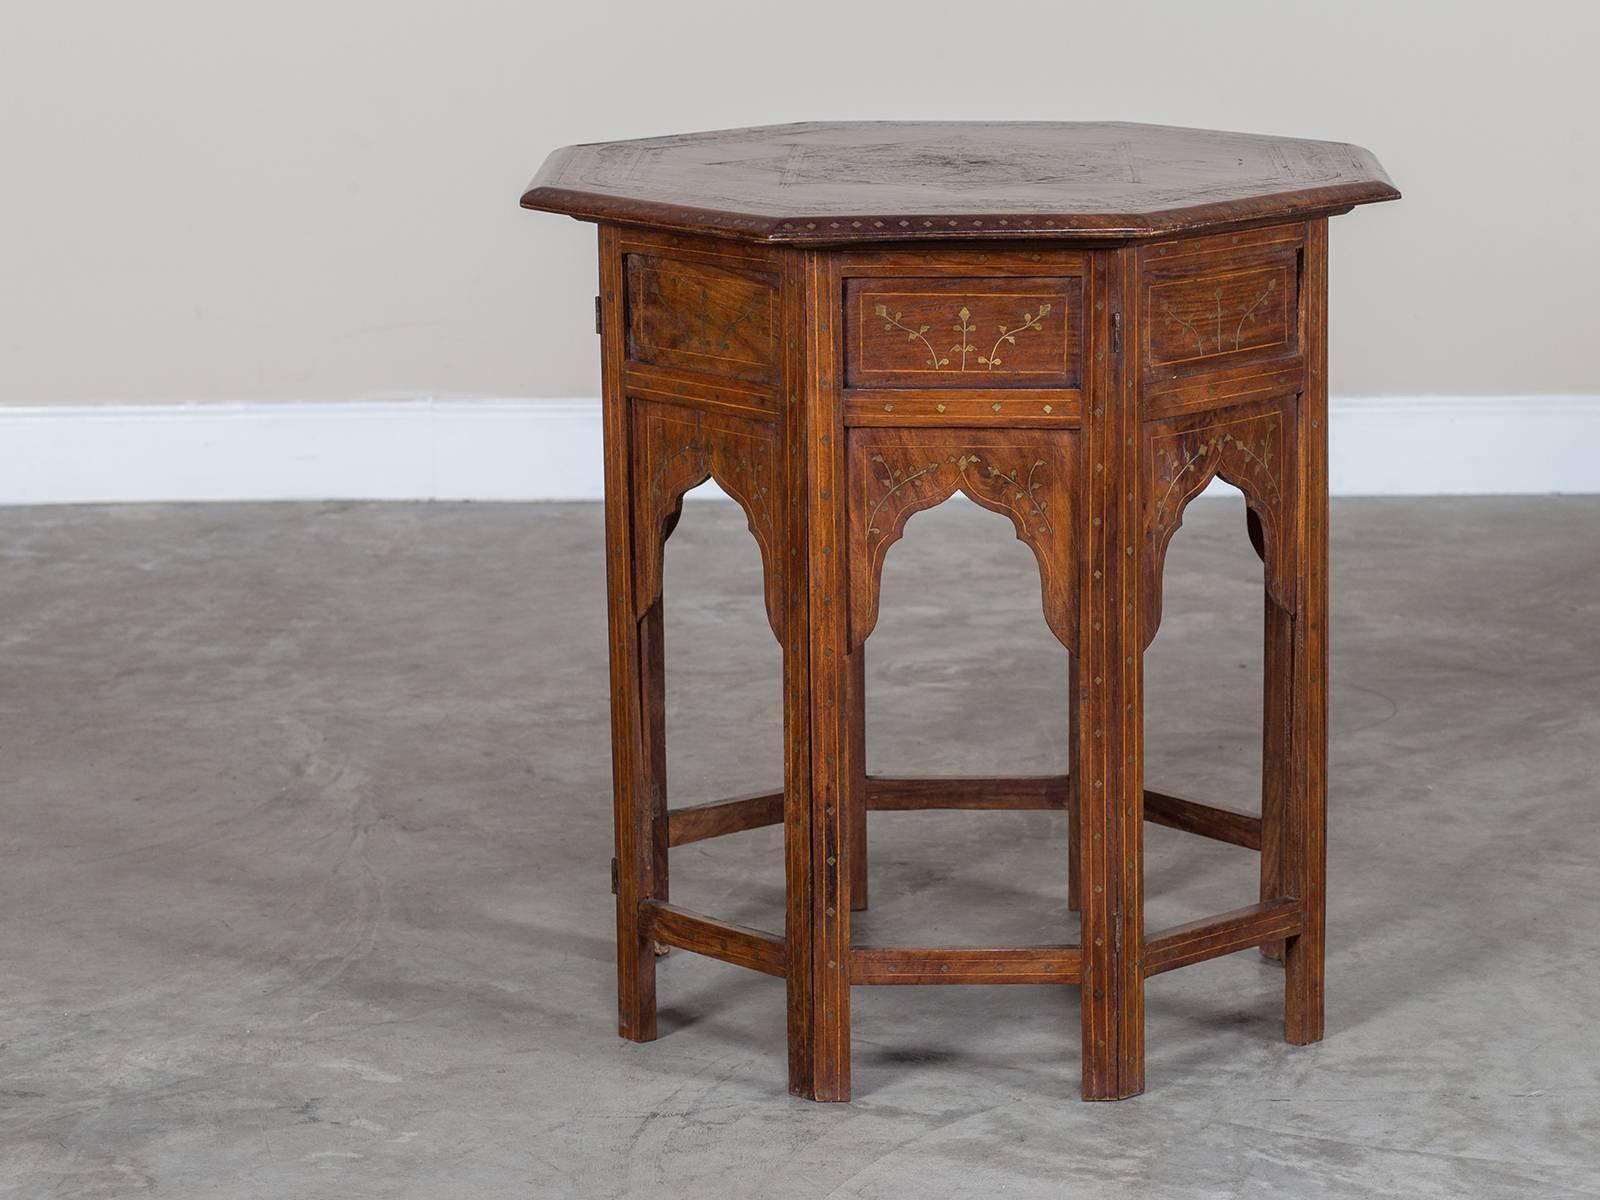 Anglo-Indian Antique Inlaid Rosewood, Ebony and Brass Hoshiapur Indian Table, circa 1890 For Sale